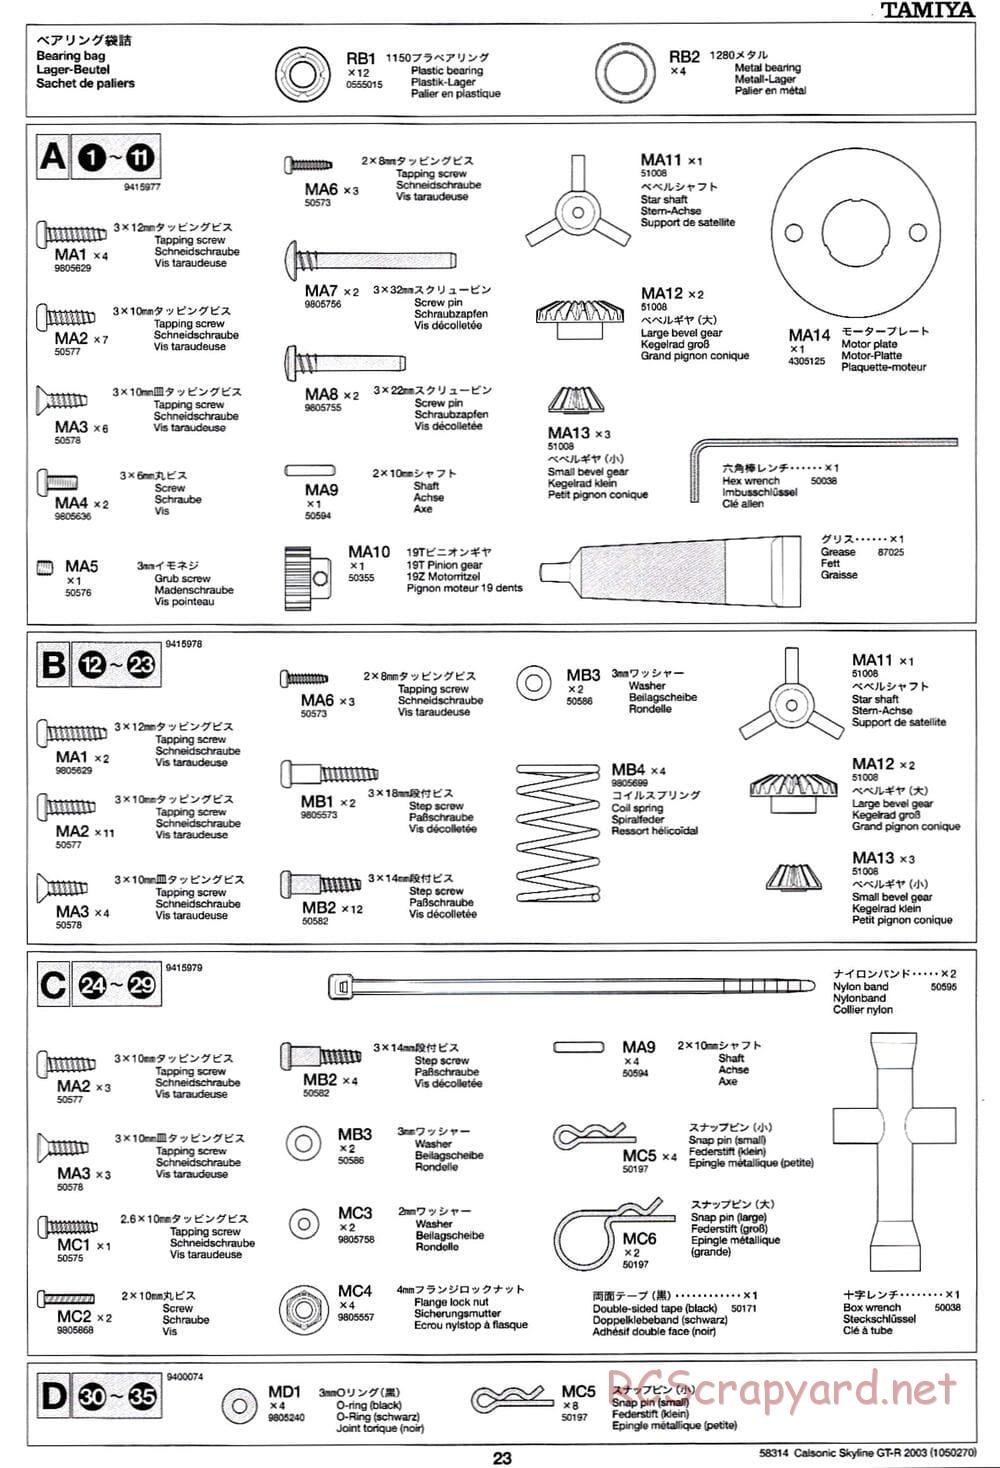 Tamiya - Calsonic Skyline GT-R 2003 - TT-01 Chassis - Manual - Page 23